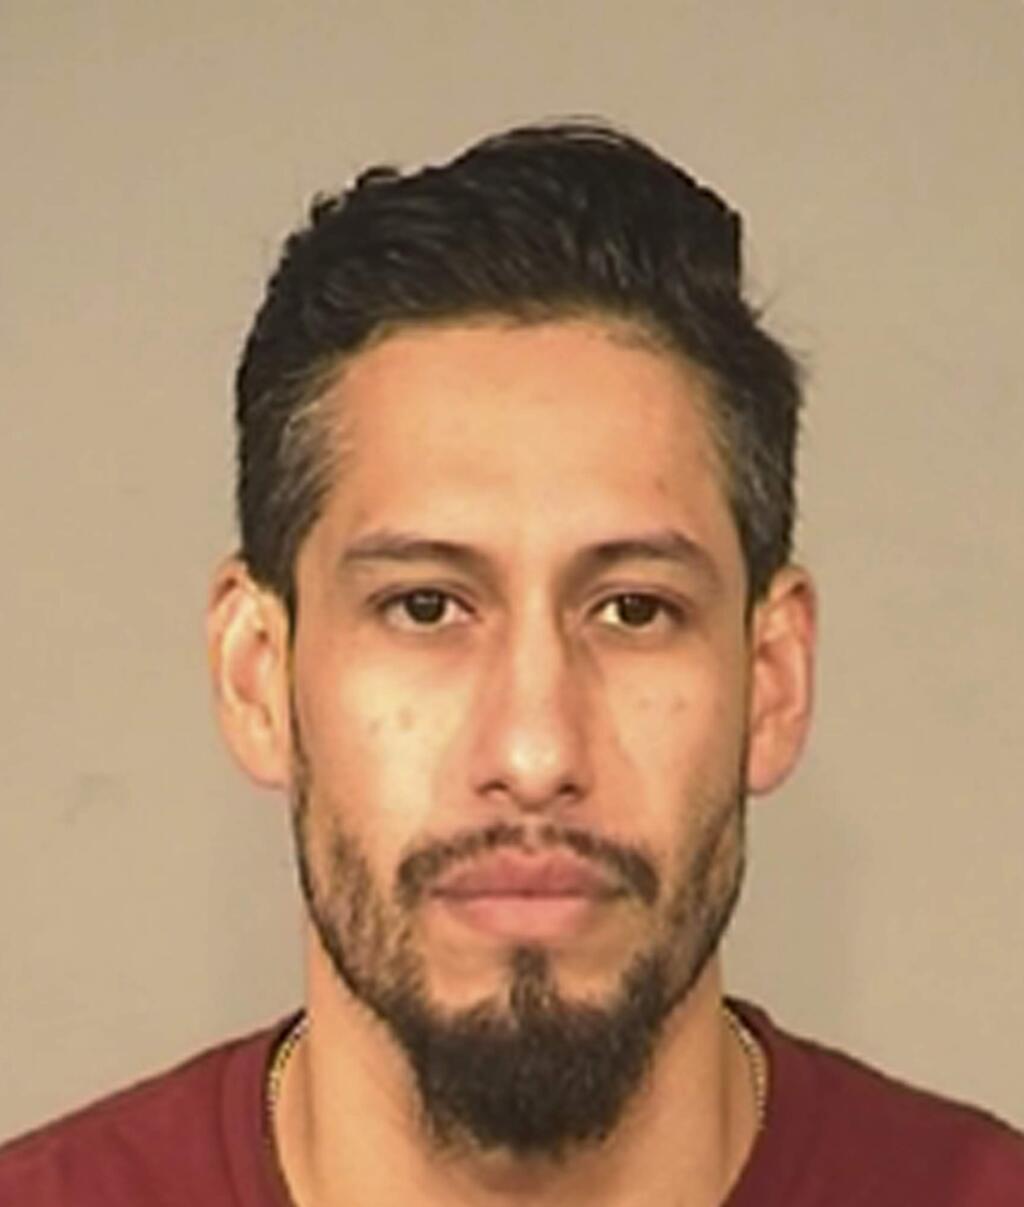 Oscar Ramos is shown in this undated photo provided by the Fresno Police Department. Ramos has been arrested on suspicion of leaving a loaded gun unsecured before a 2-year-old boy fatally shot himself. The Fresno Bee reports 35-year-old Oscar Ramos was arrested Monday, July 10, 2018, for investigation of criminal storage of a firearm and child endangerment. Police say the toddler, Jace Alexander, shot himself in the head in Ramos' home on Saturday and later died at a hospital. (Fresno Police Department via AP)